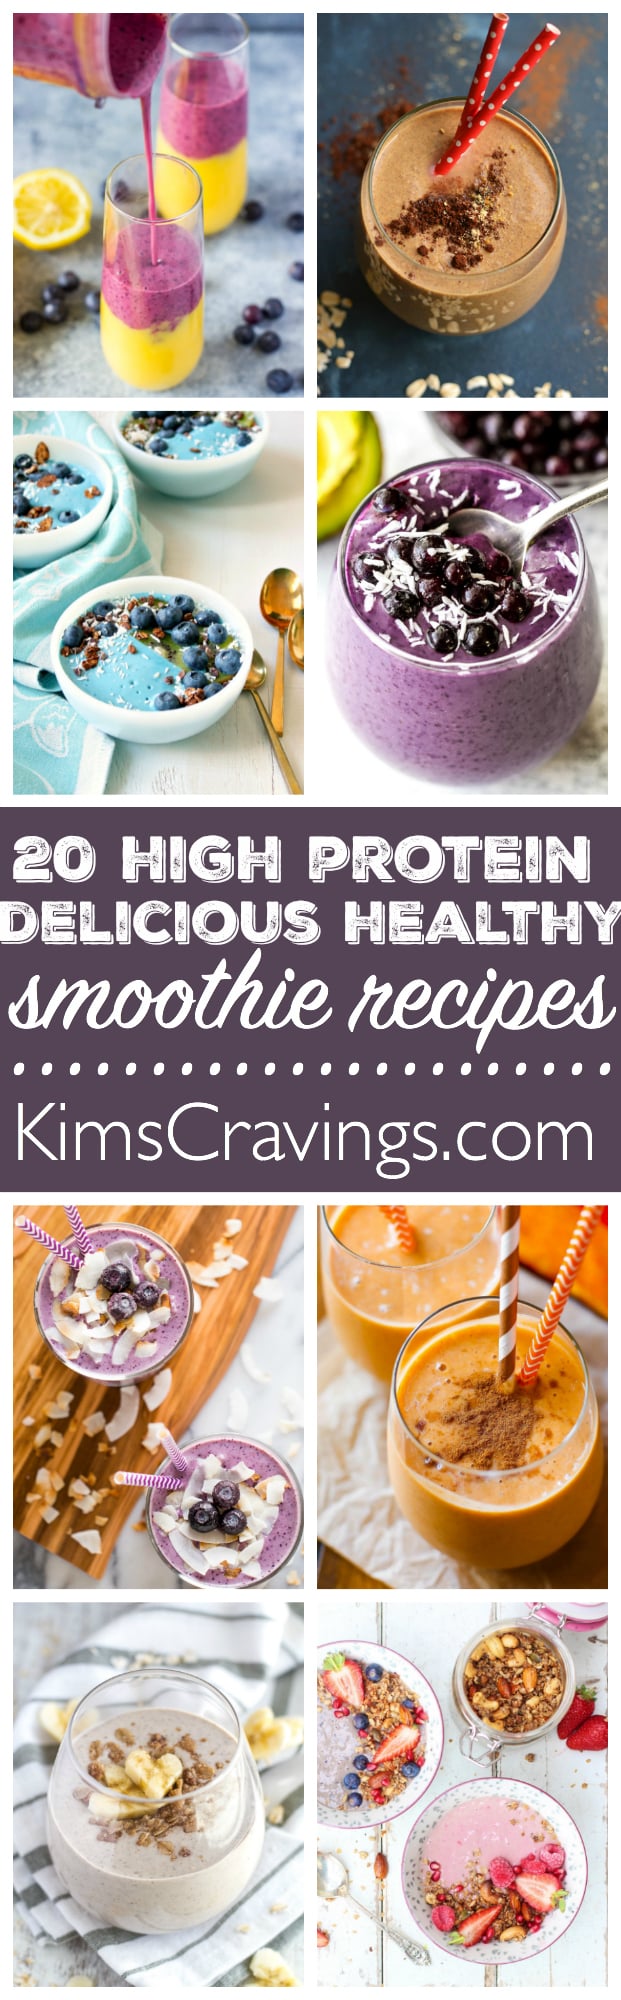 This round up includes the best healthy, high protein, delicious smoothie recipes that are perfect for a quick boost any time of day.